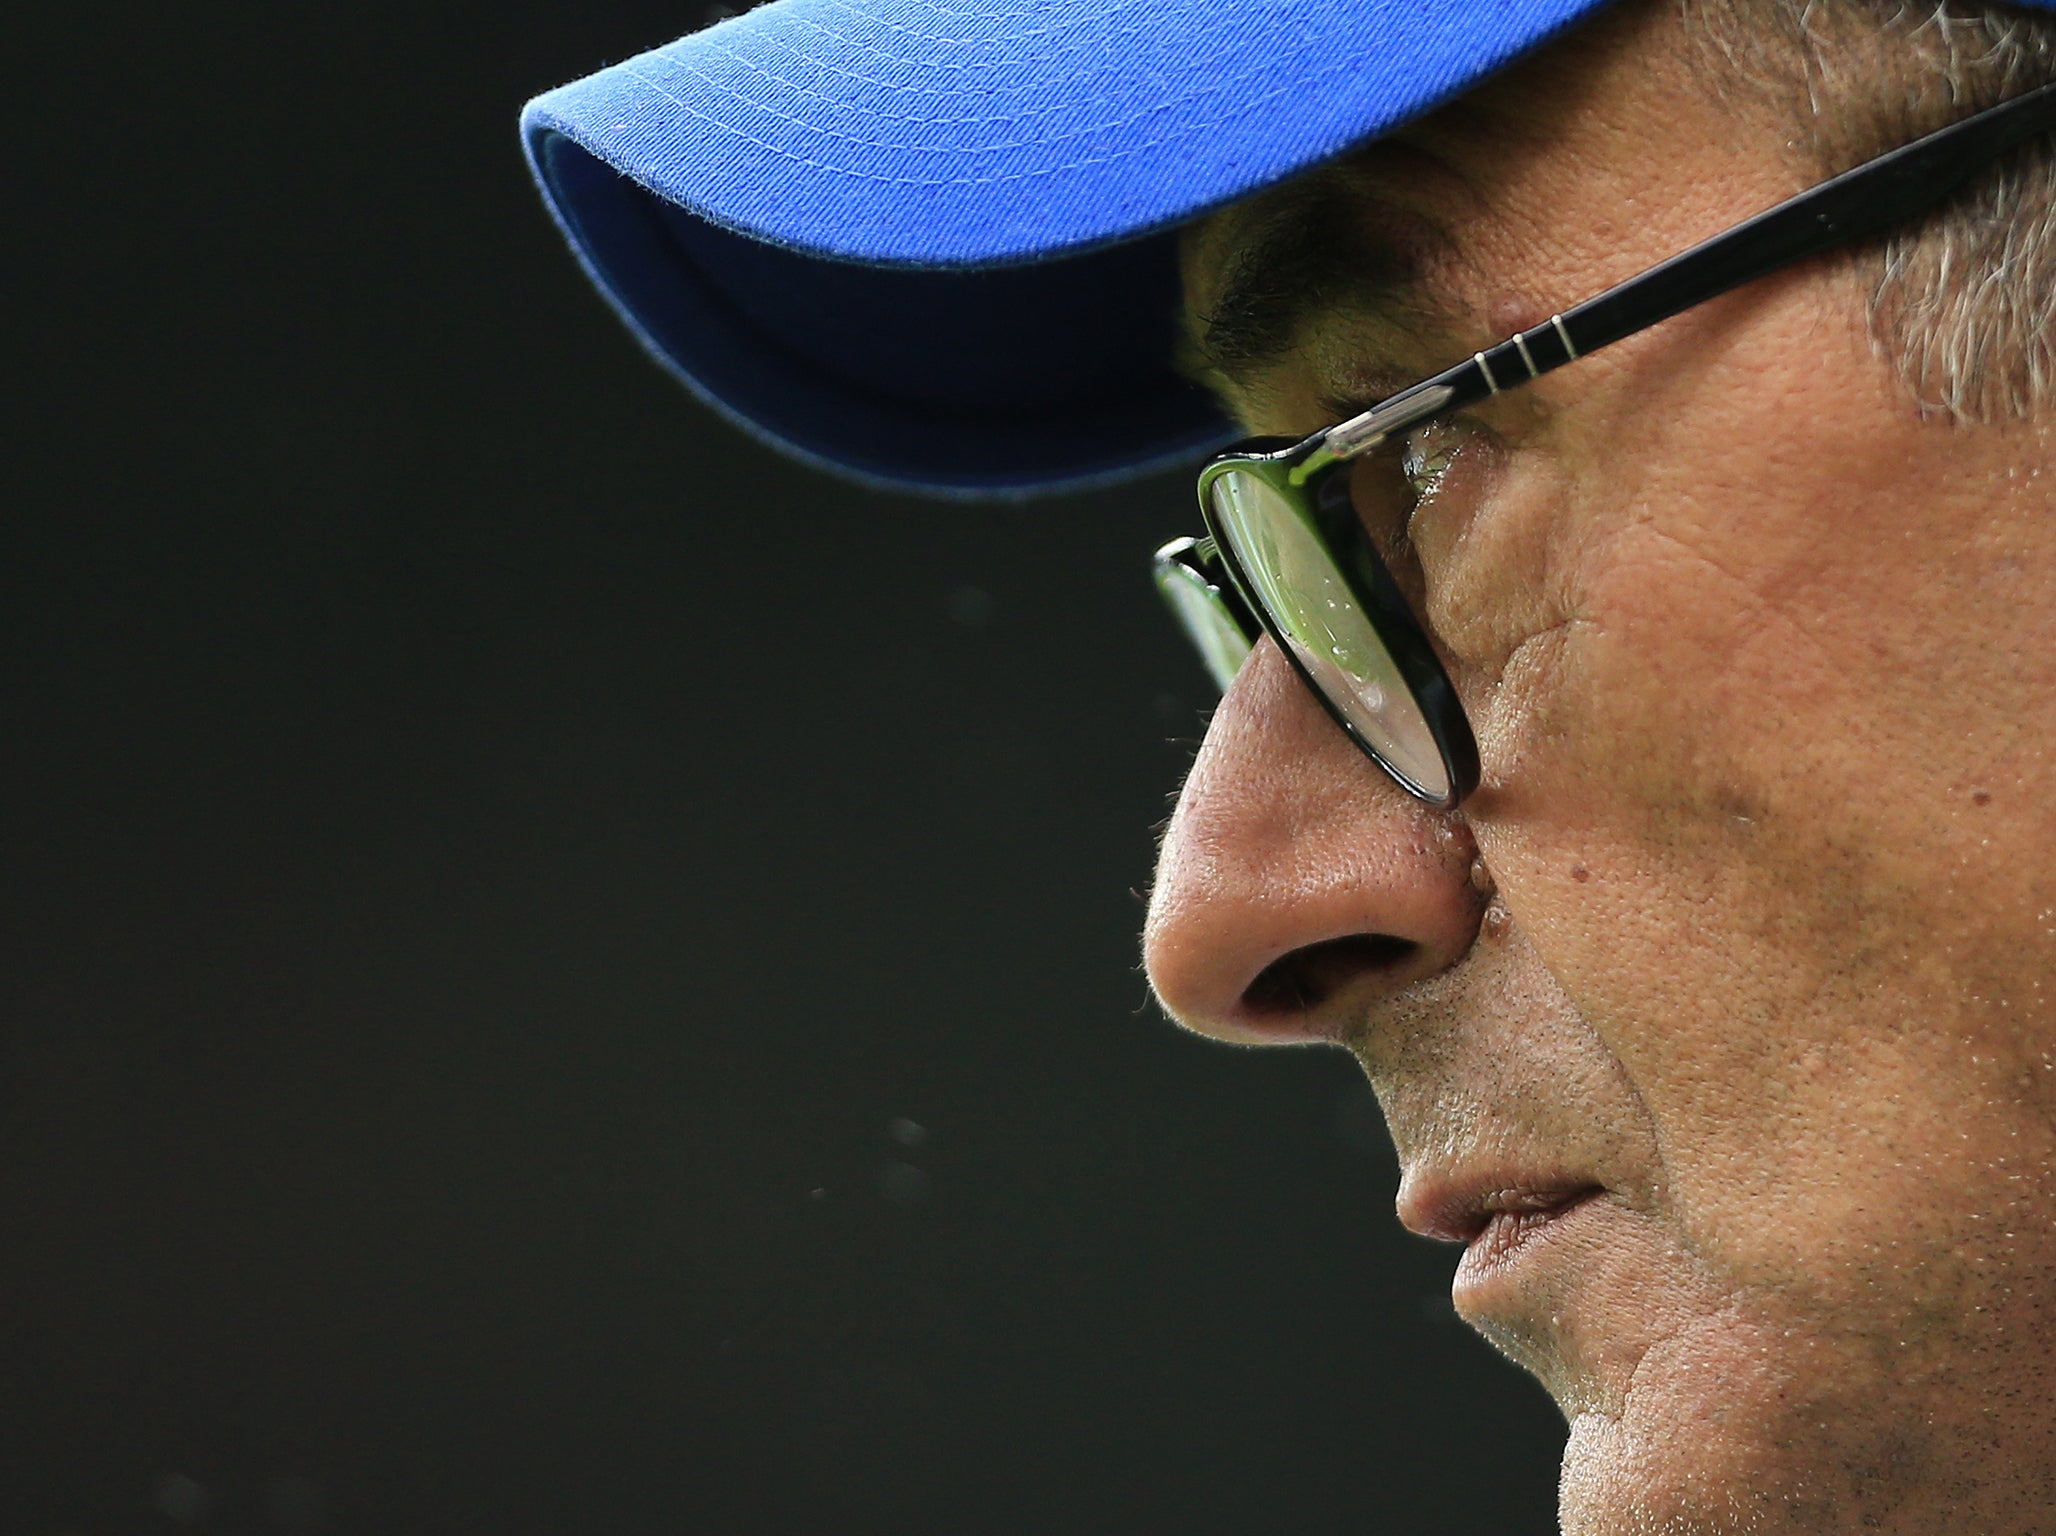 There are signs Maurizio Sarri is beginning to implement his style